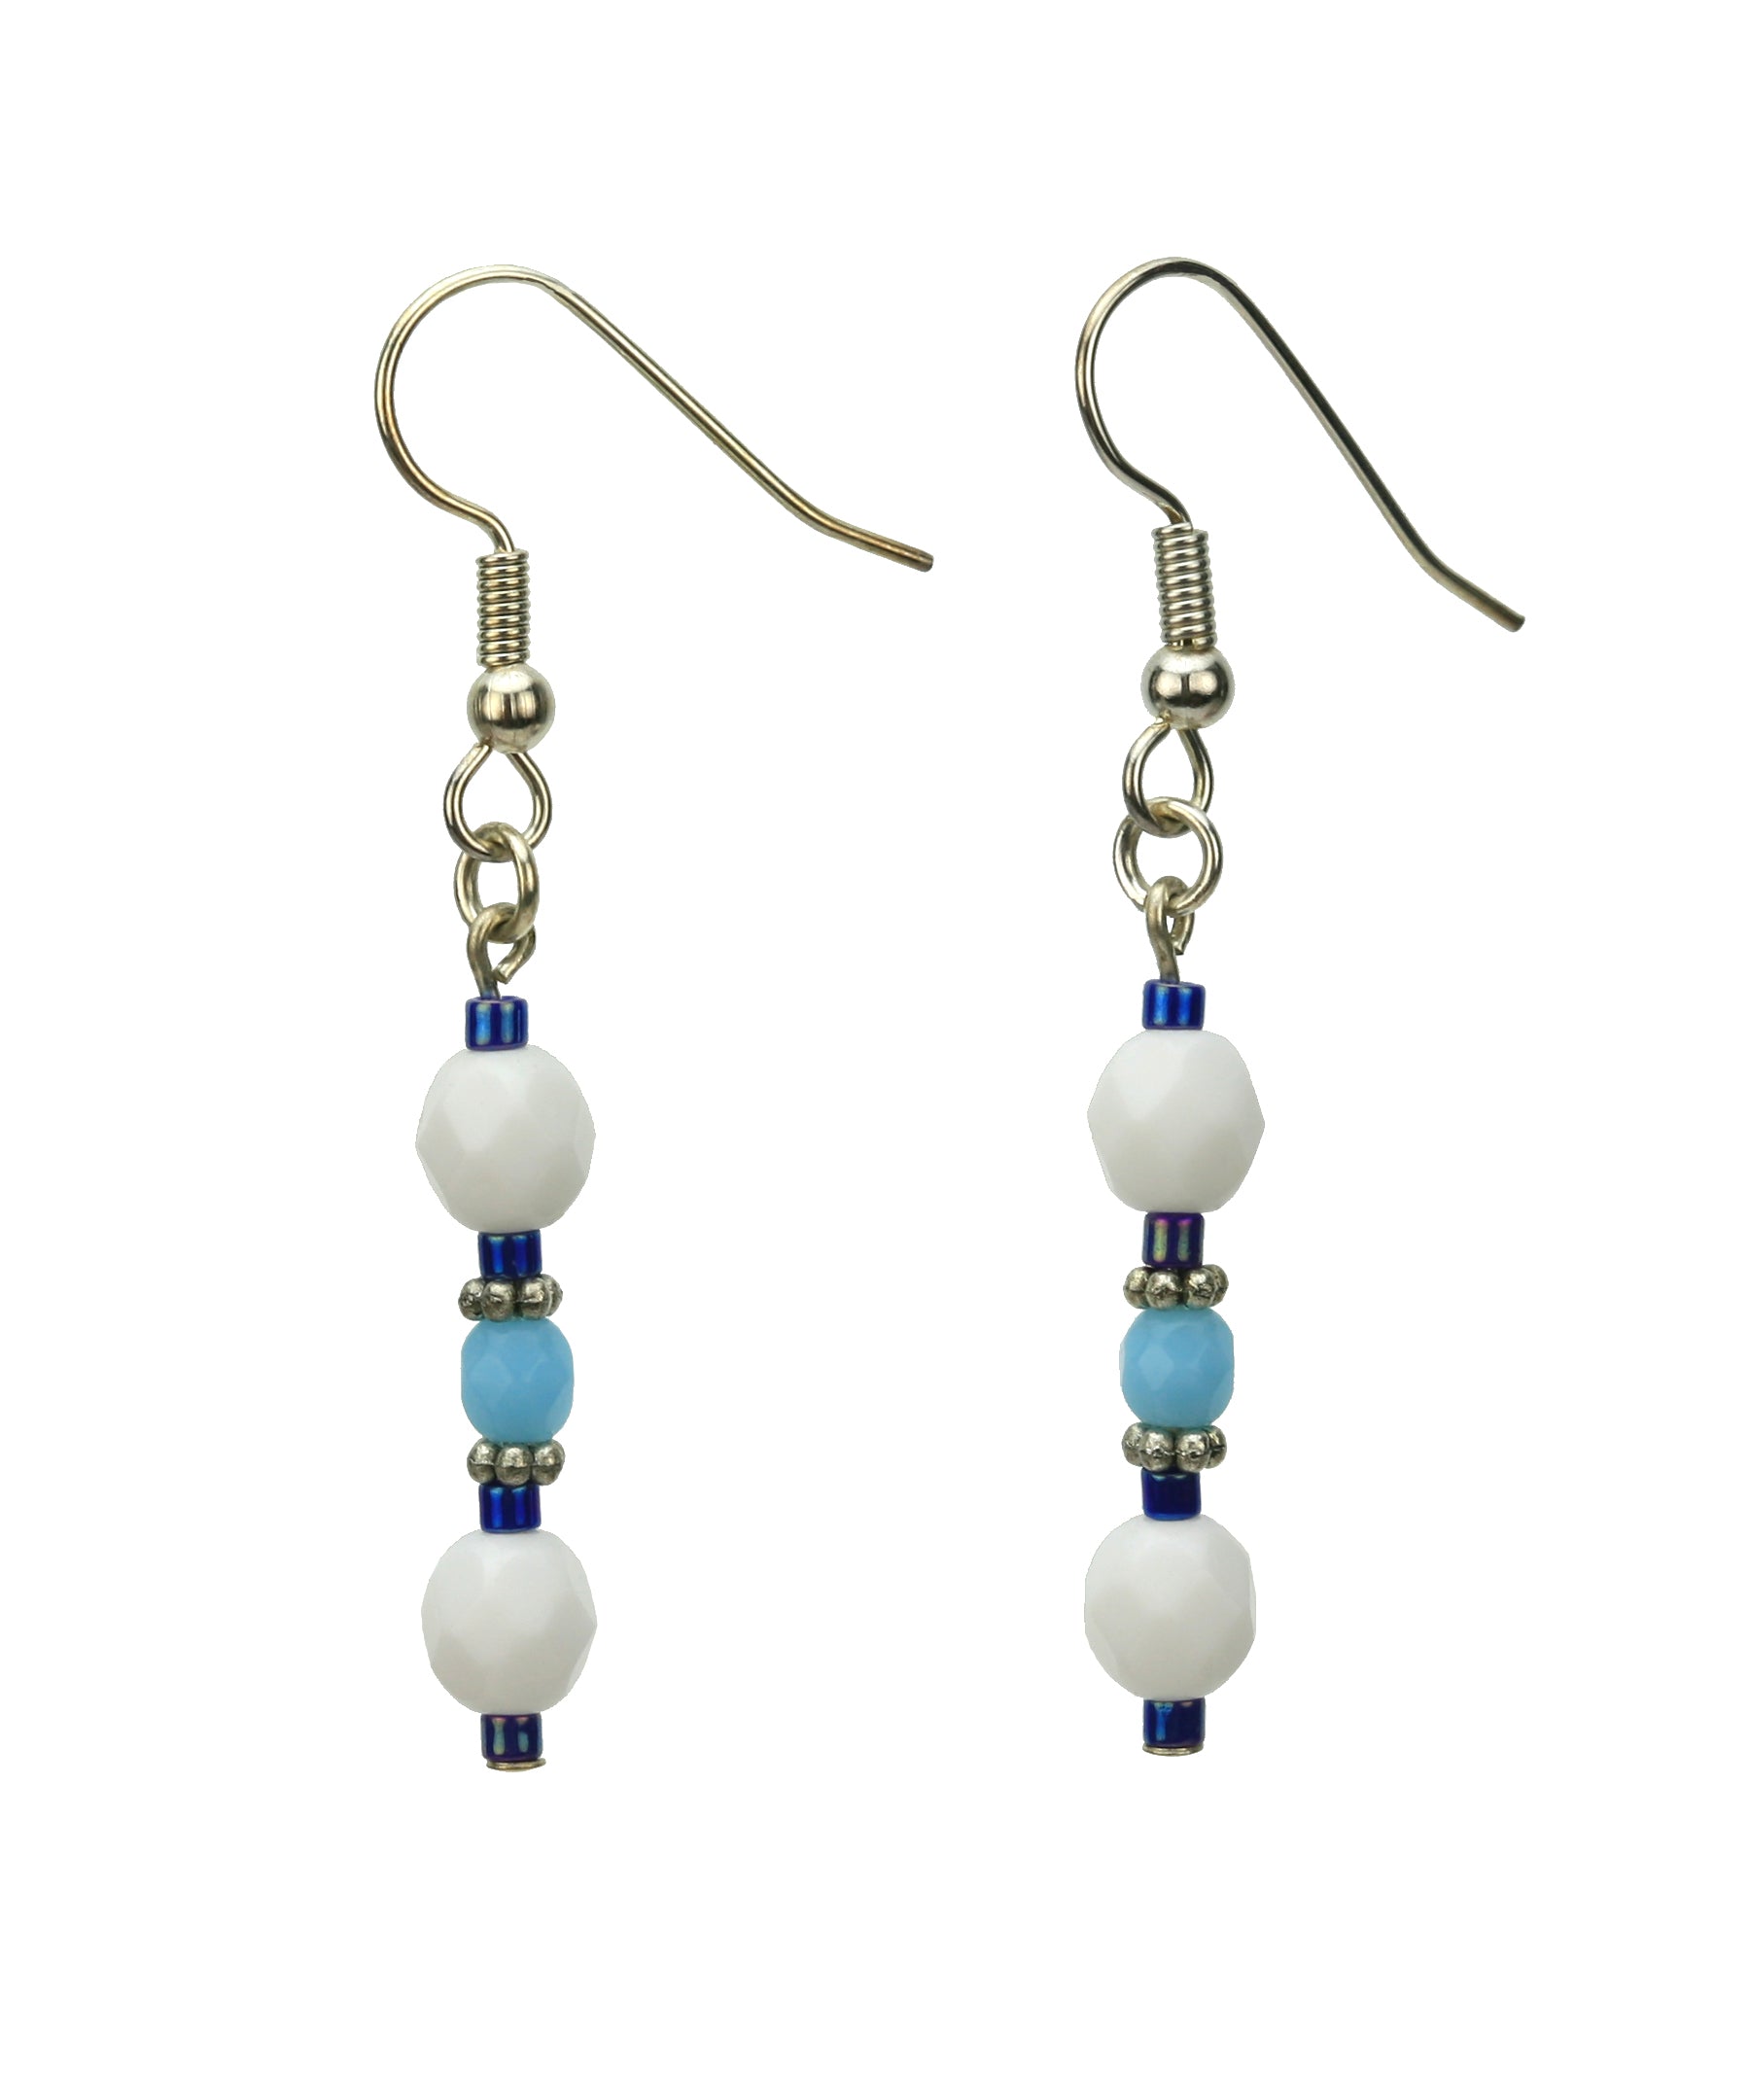 Opaque White and Turquoise Blue Silver Earrings